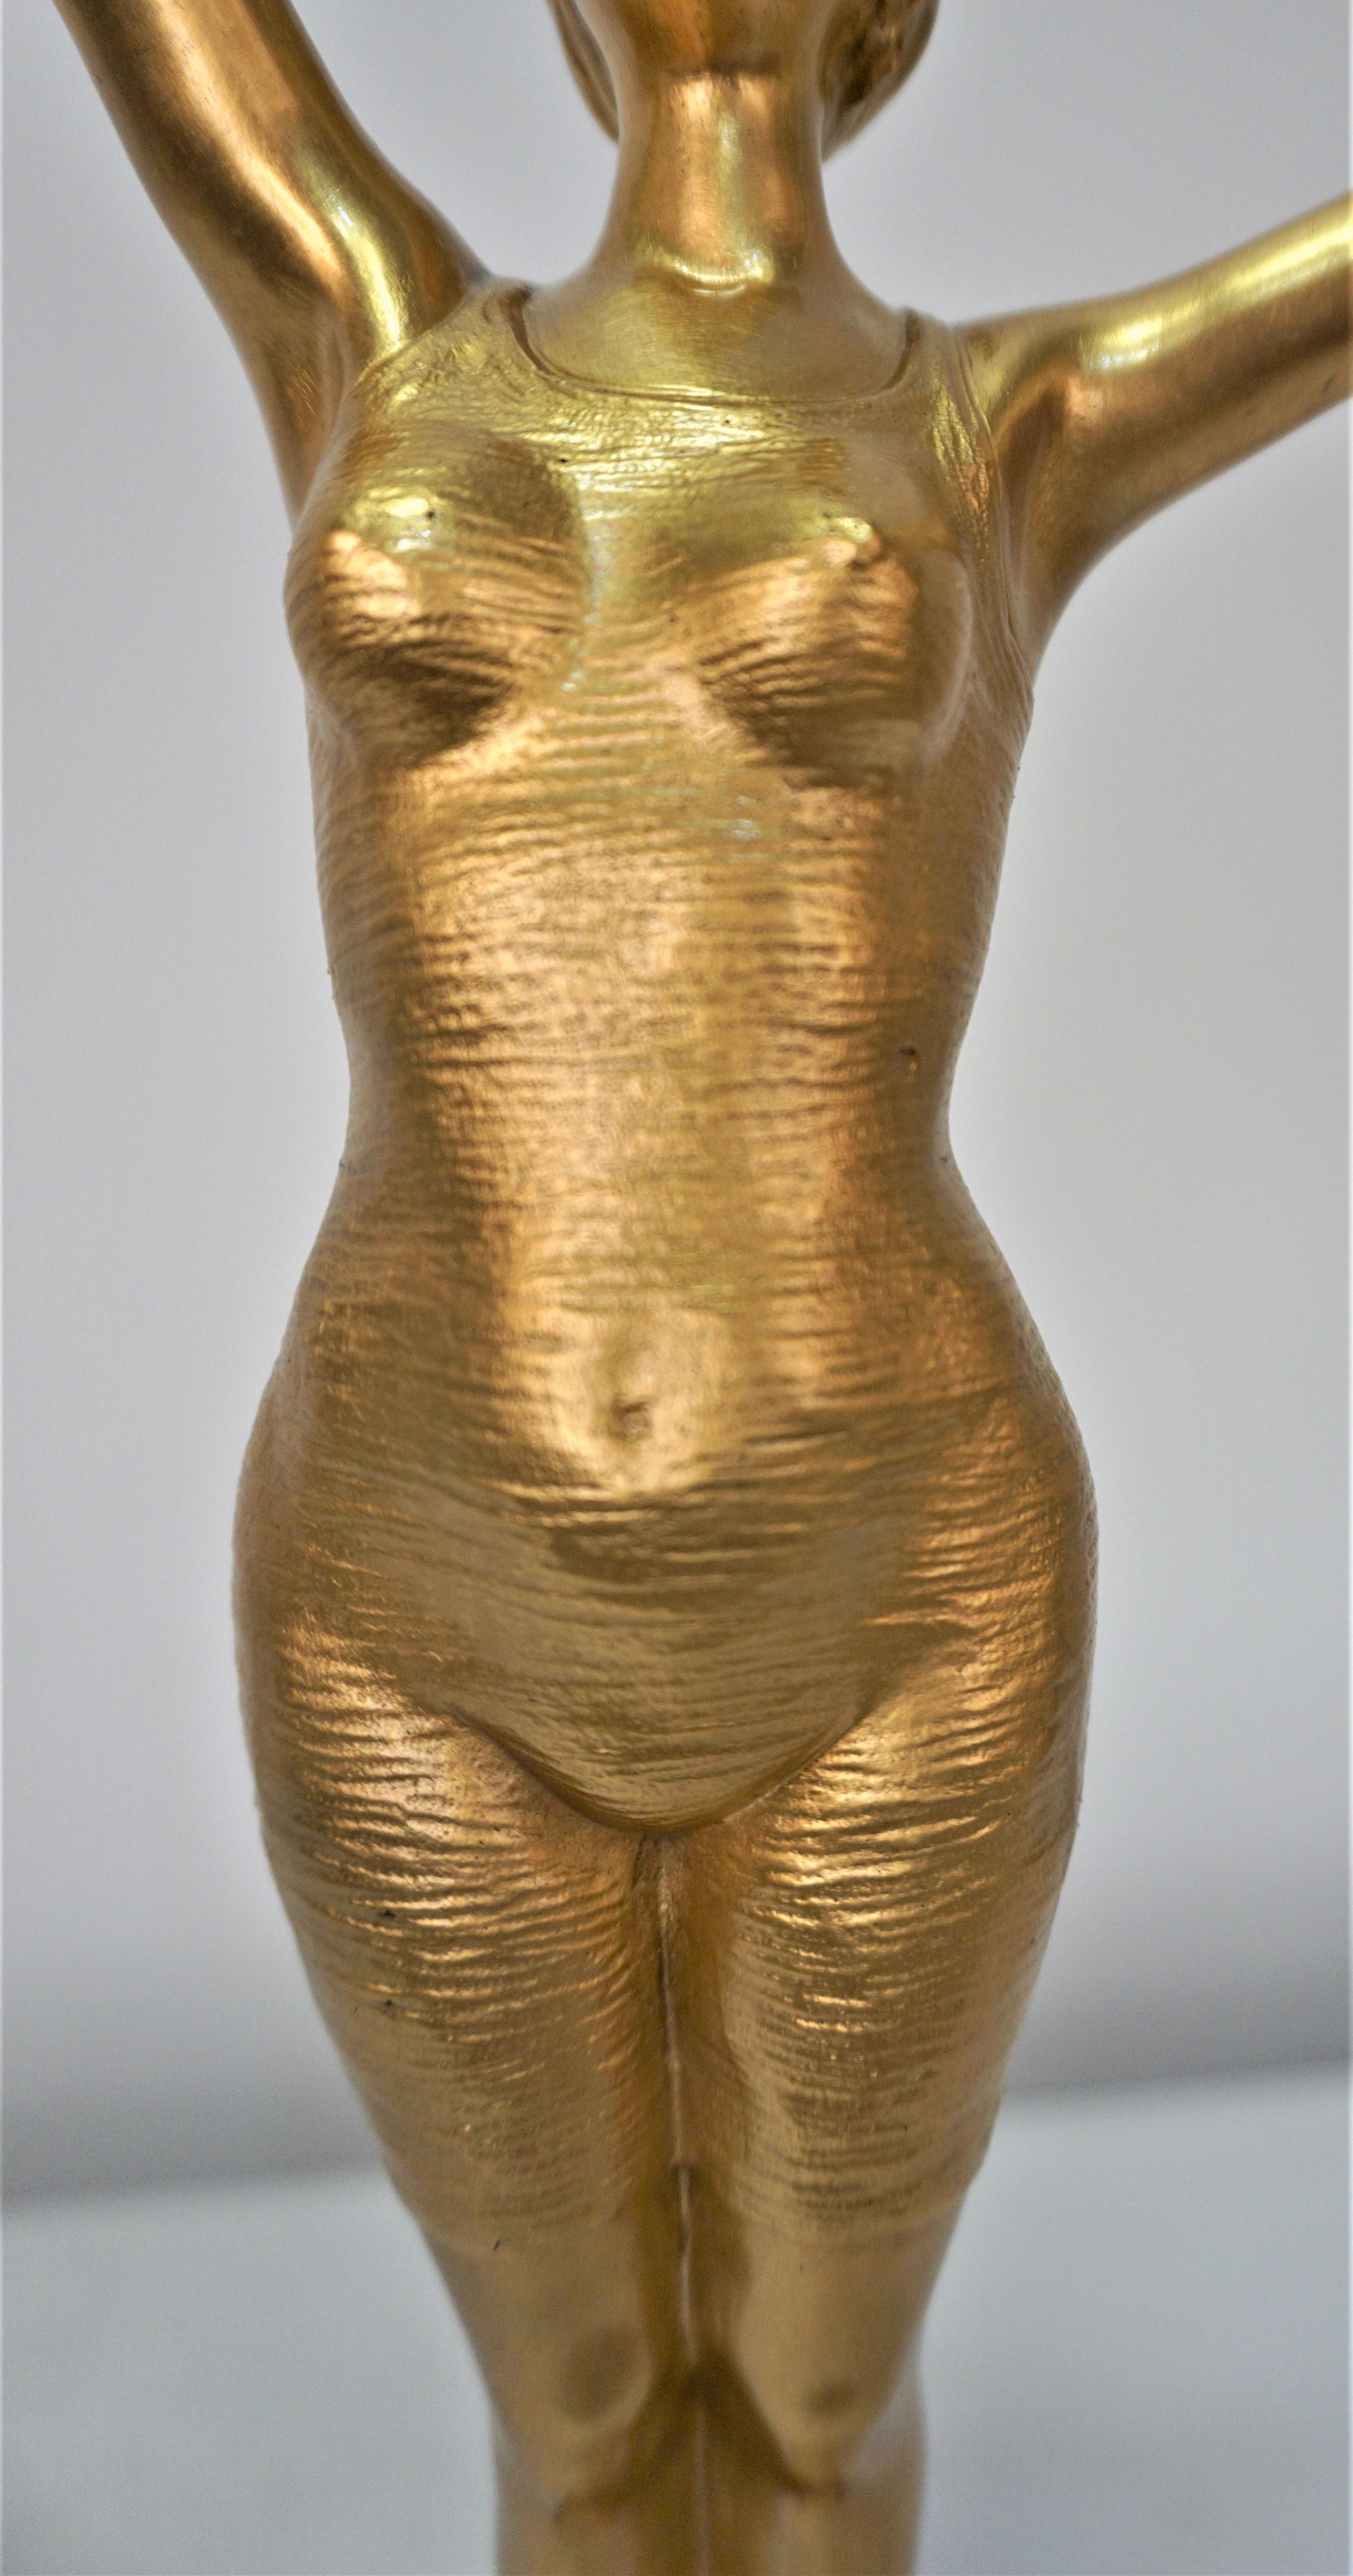 Gilt Dore Bronze Female Swimmer by George Omerth, 1895-1925 For Sale